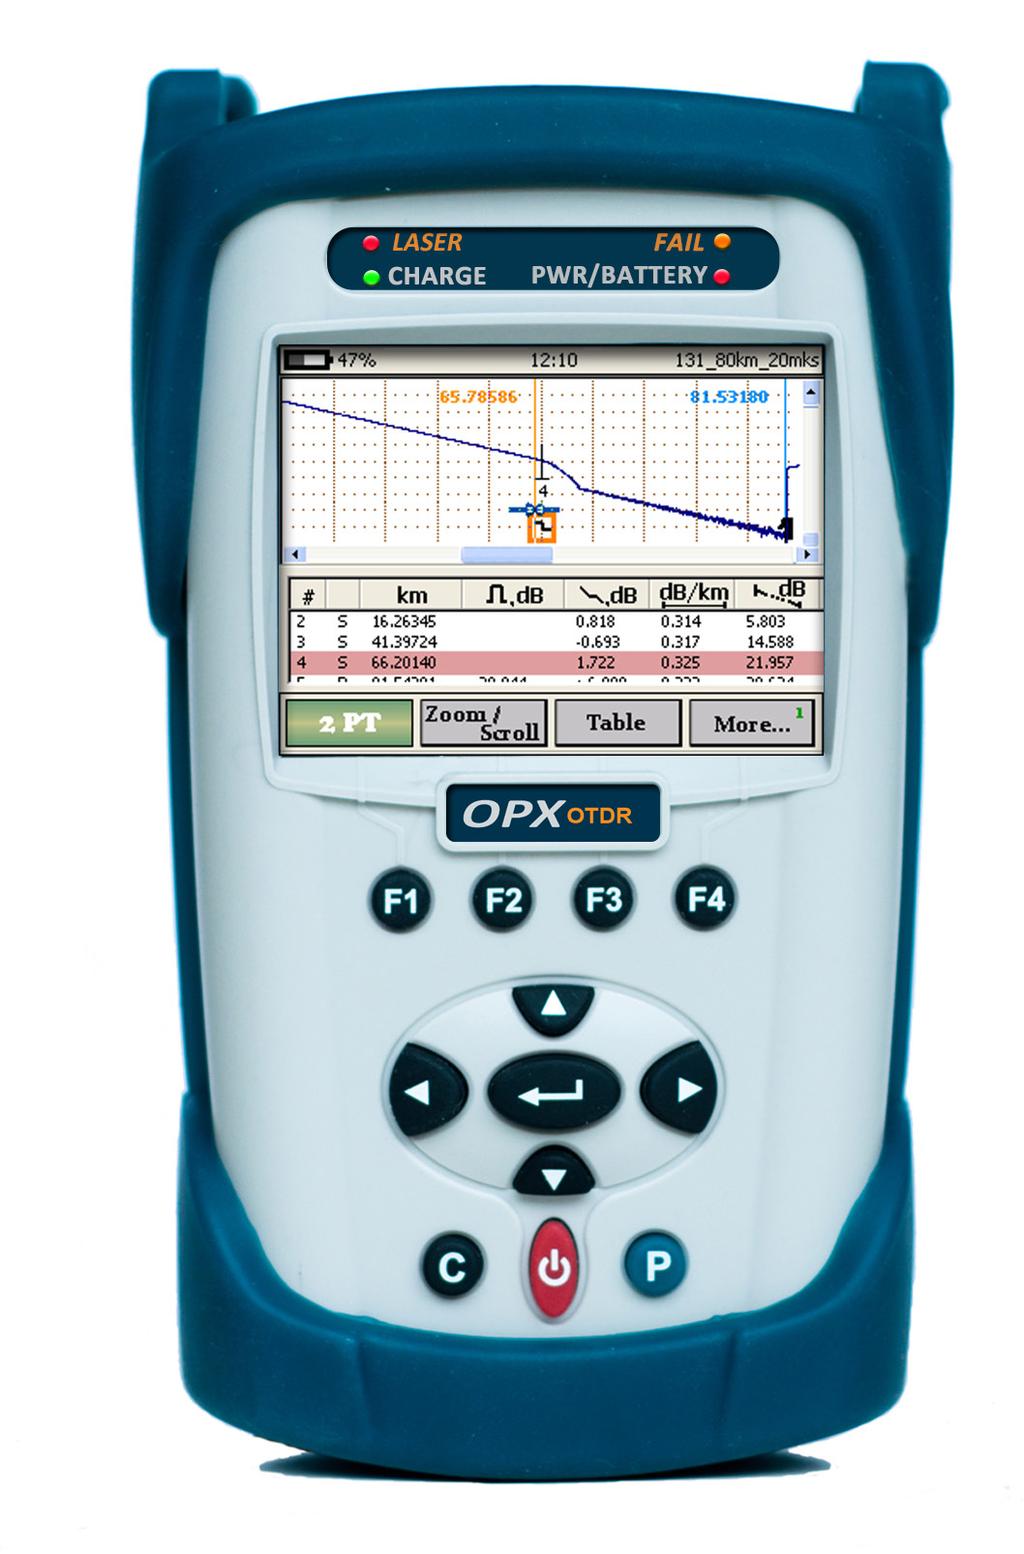 The Agizer OTDR OPX - 350 Series Universal Performer for Fiber Testing Professional Device Firmware It knows what you need After many years of collecting user feedback about hand-held instruments